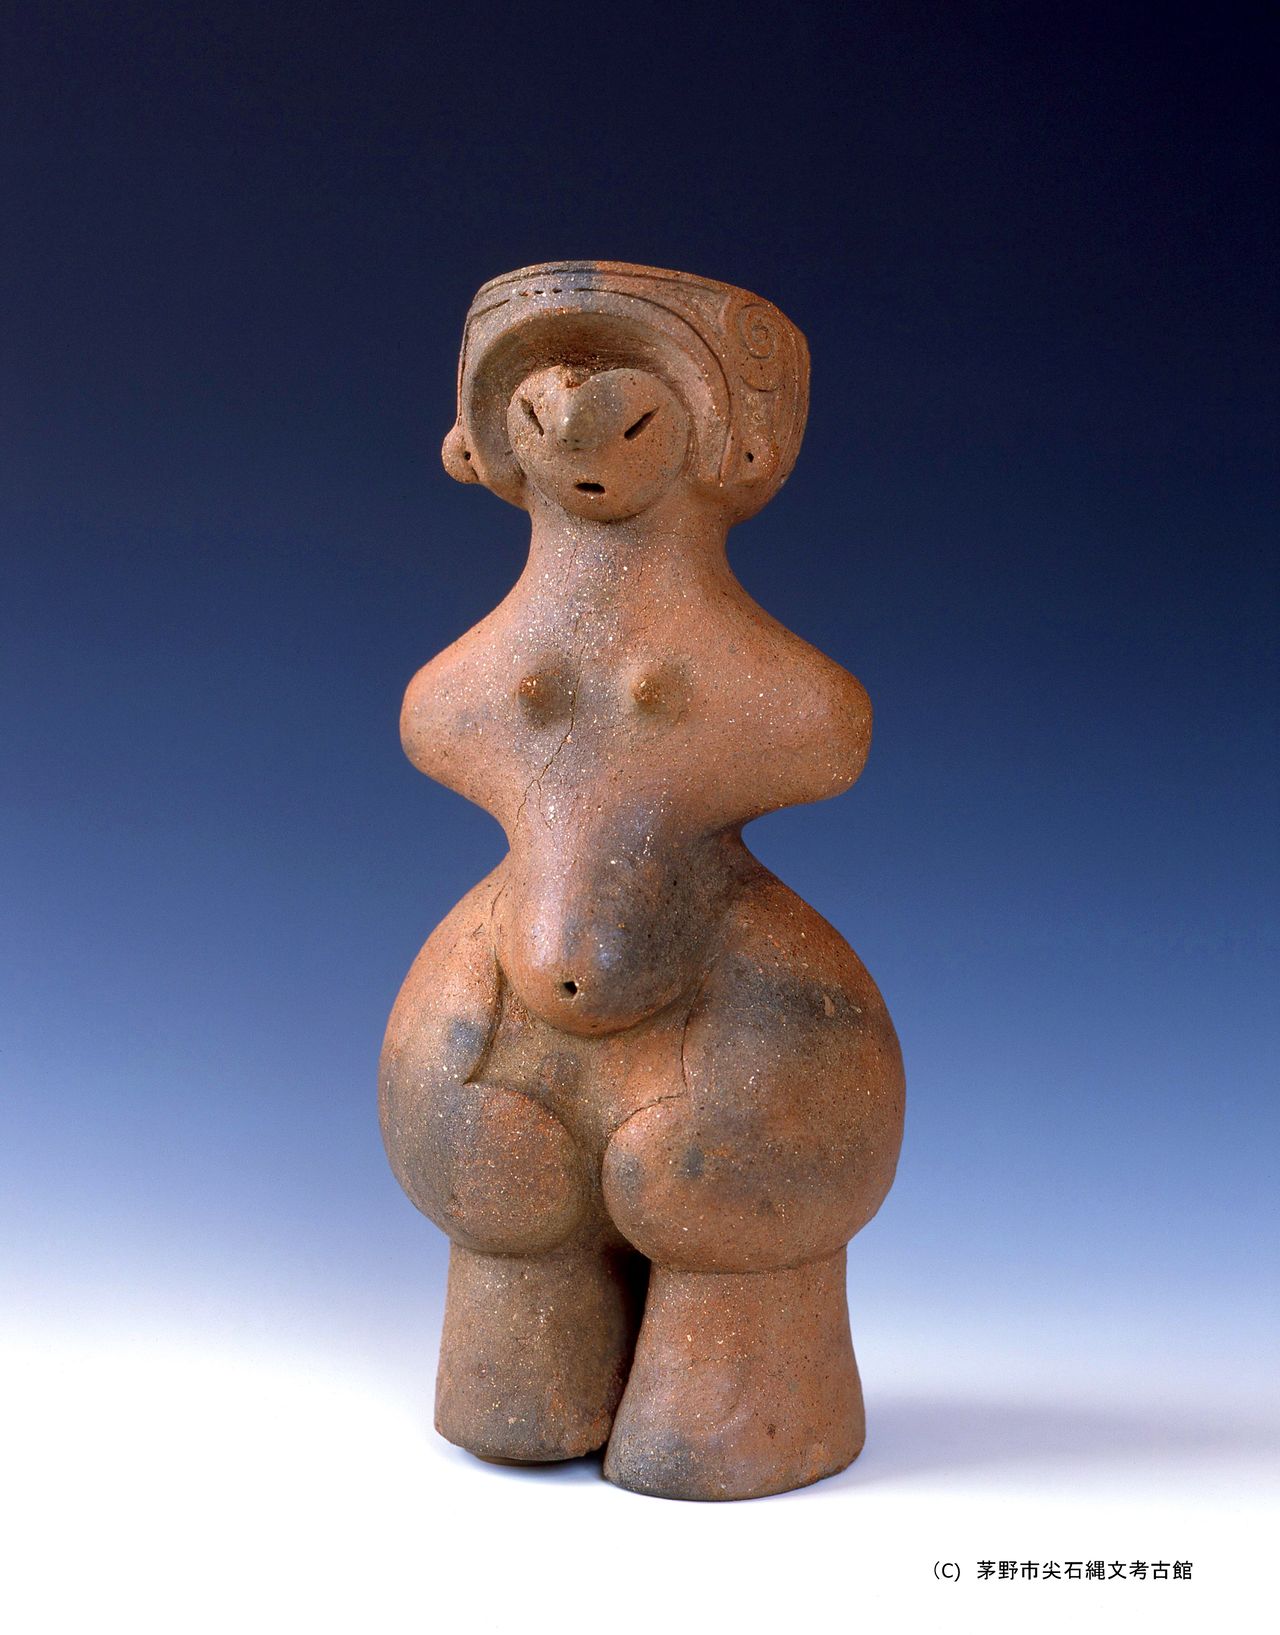  The “Jōmon Venus,” a dogū figurine of a pregnant woman designated as a national treasure, excavated from the Tanabatake Archaeological Site in Nagano Prefecture. (Courtesy Togariishi Jomon Archaeological Museum)